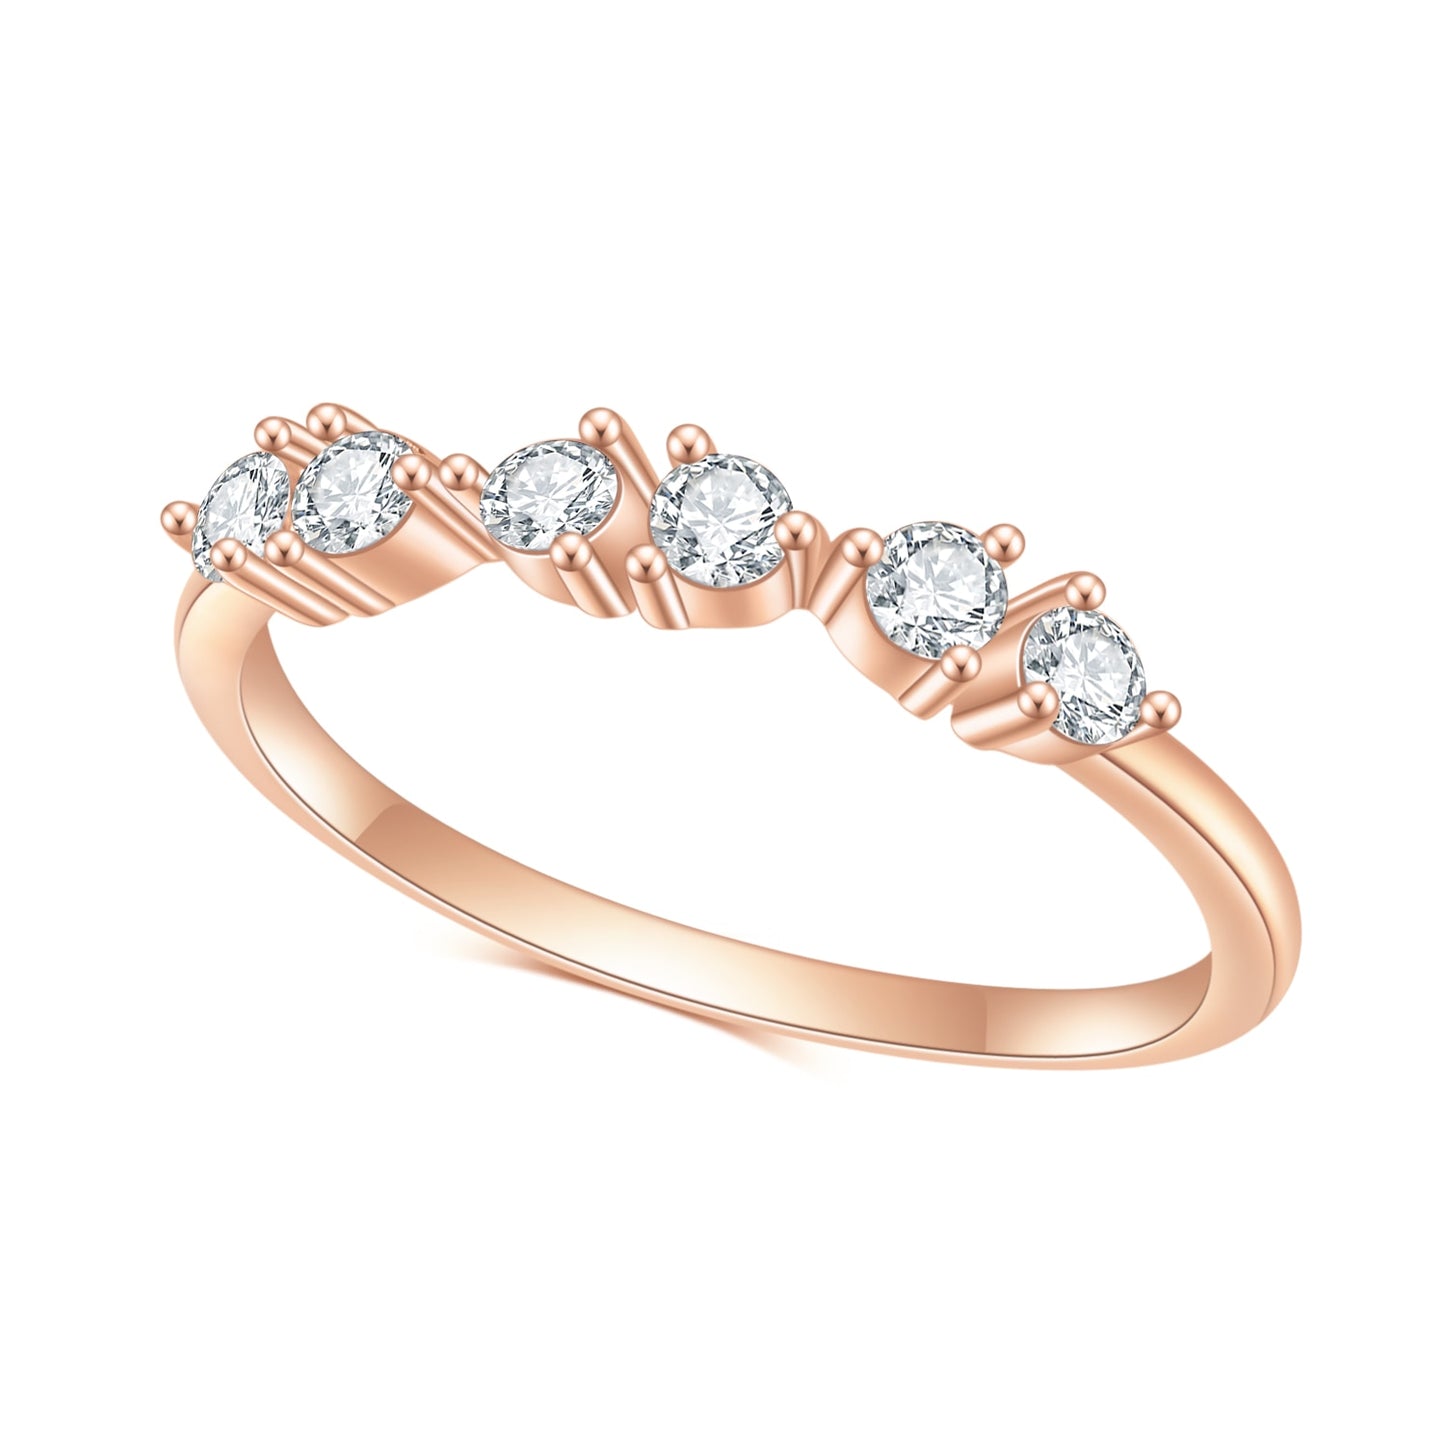 A rose gold wedding band with 3 pairs of 2 moissanites spaced horizontally on the ring slightly spaced apart.